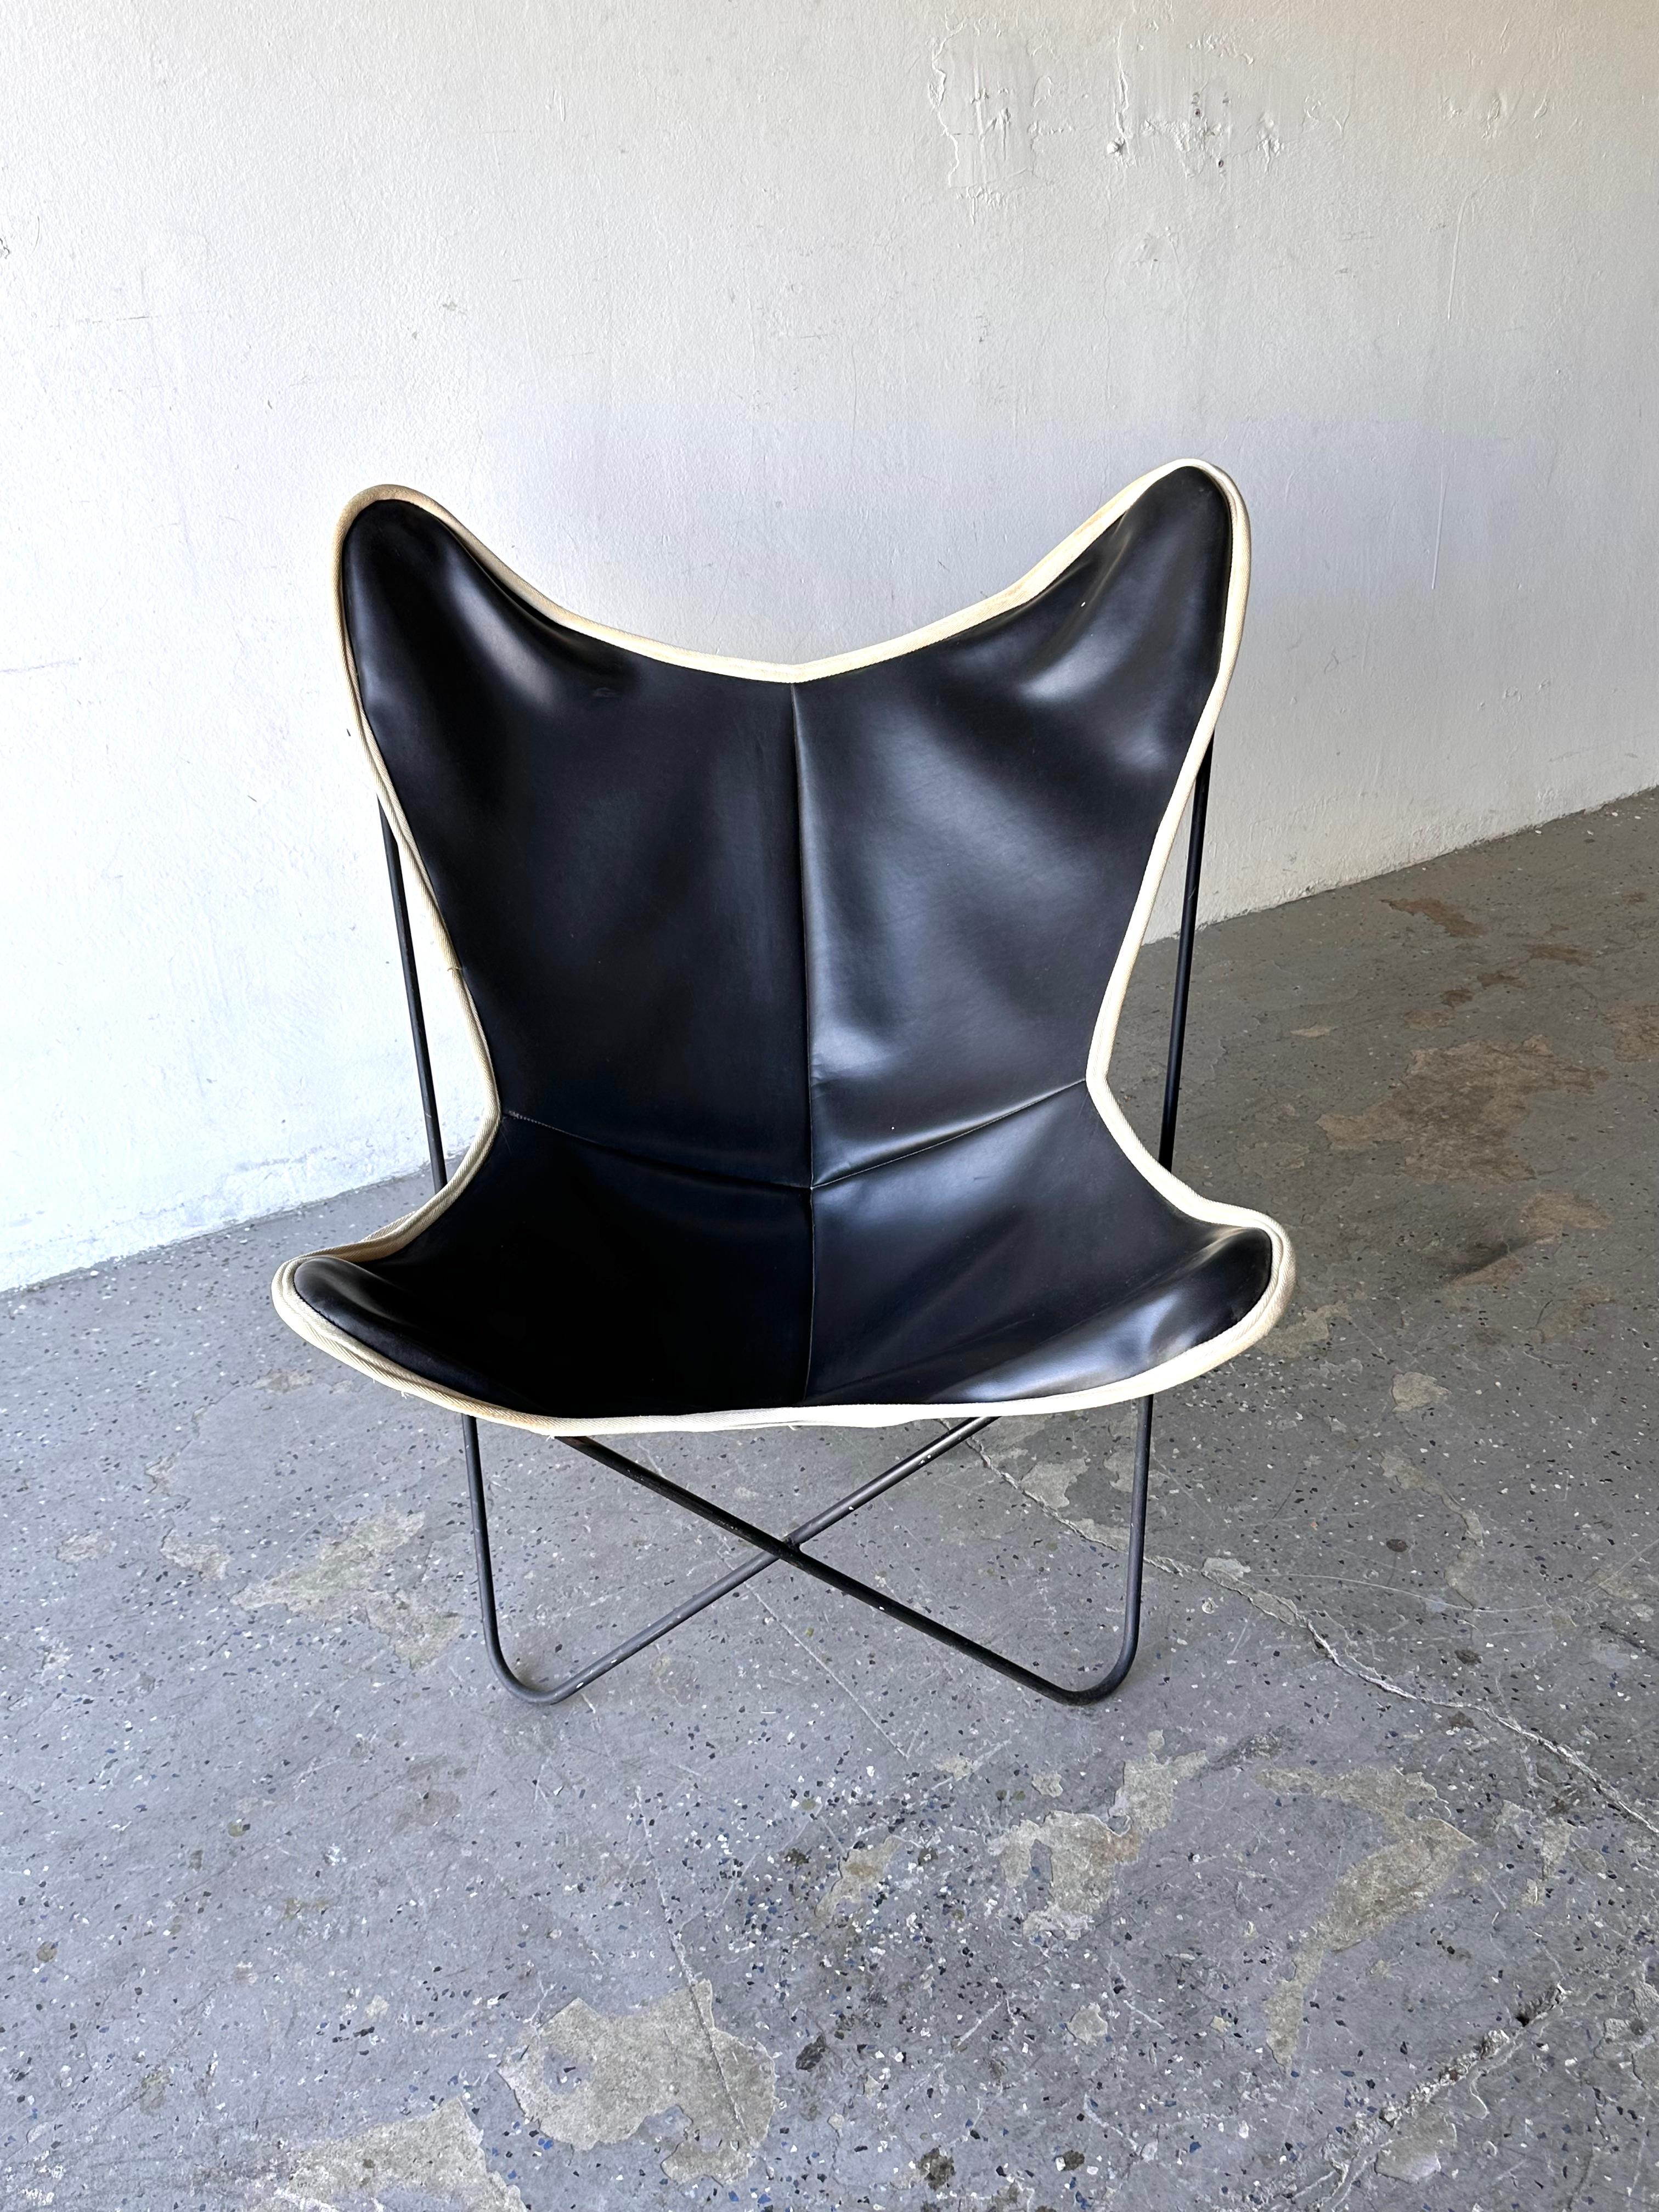  1950’s  vintage  Butterfly chair, designed by Jorge Ferrari Hardoy, Antonio Bonet, and Juan Kurchan for Knoll. This is a vintage example, which came from a hollywood  home along with a number of other period-correct highend pieces. This particular